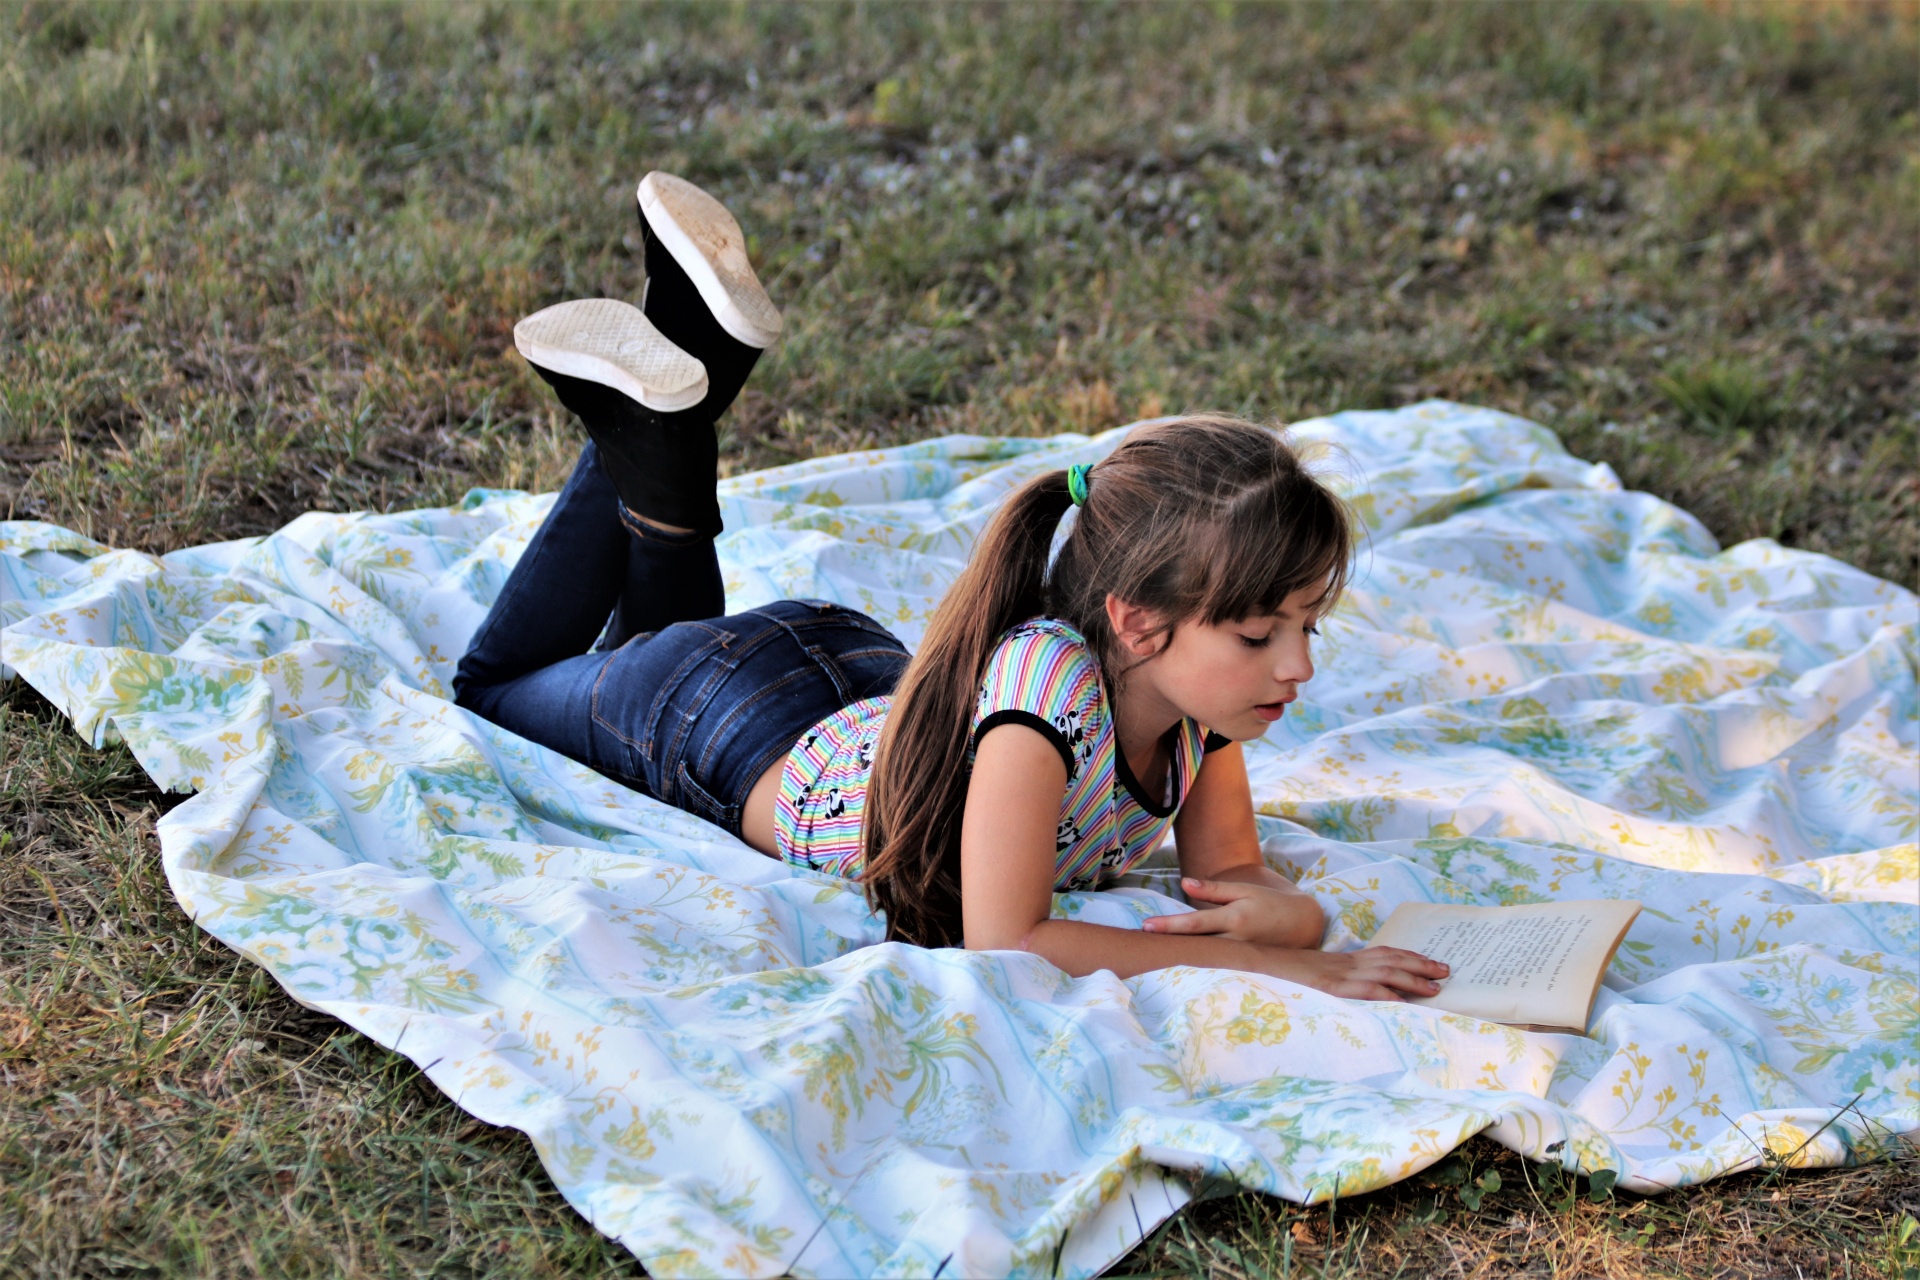 A young girl is lying on a blanket in the grass, reading a book.